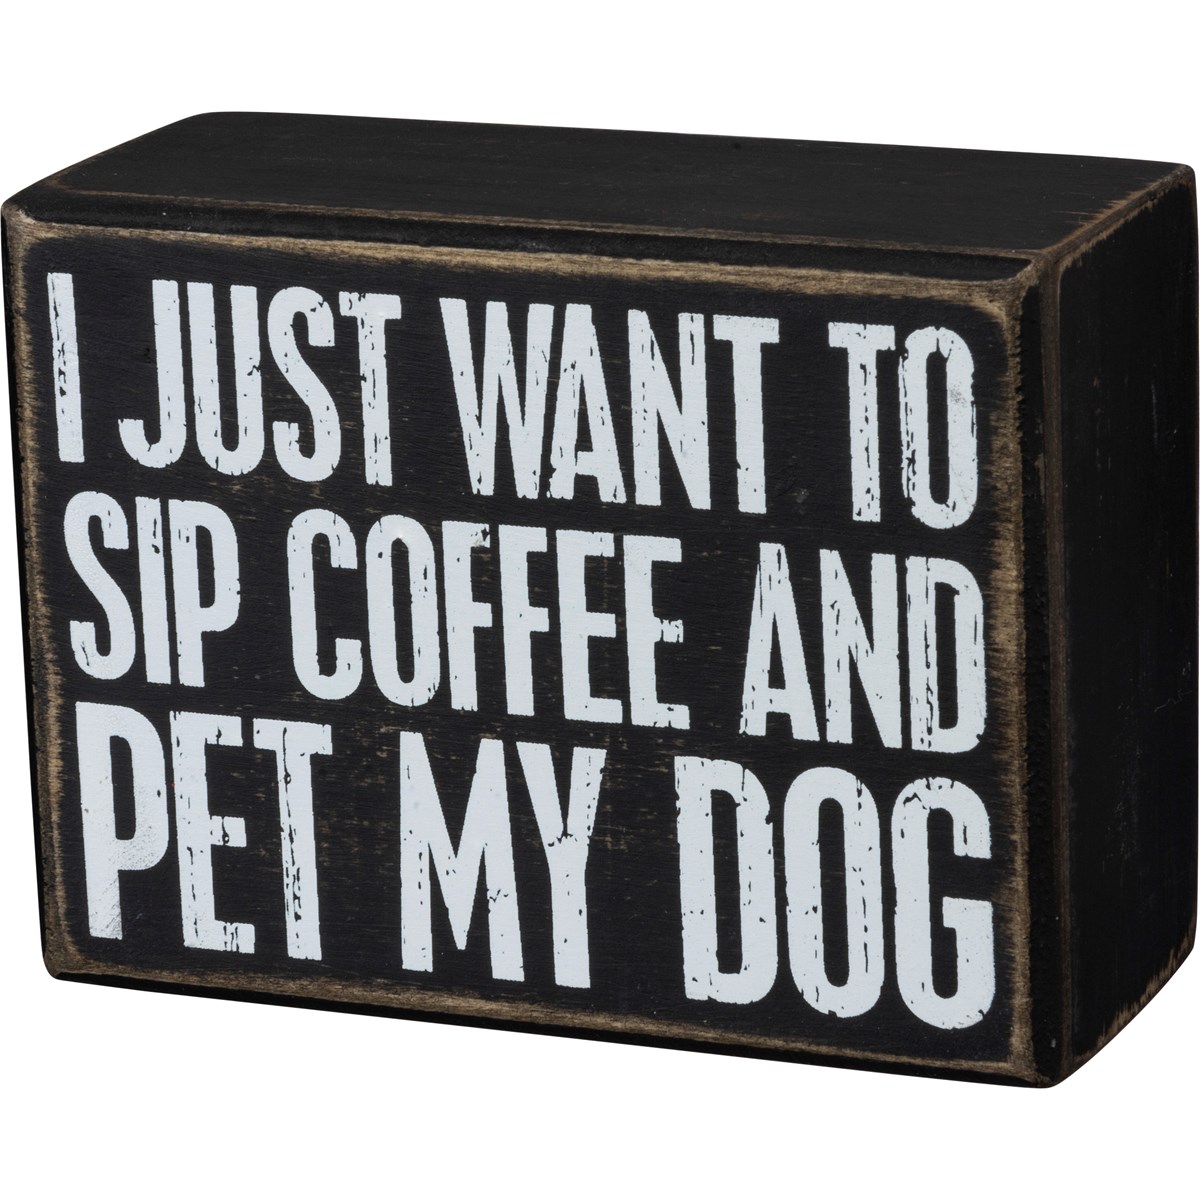 Box Sign - Just Want To Sip Coffee And Pet My Dog - 4" x 3" x 1.75" - Wood